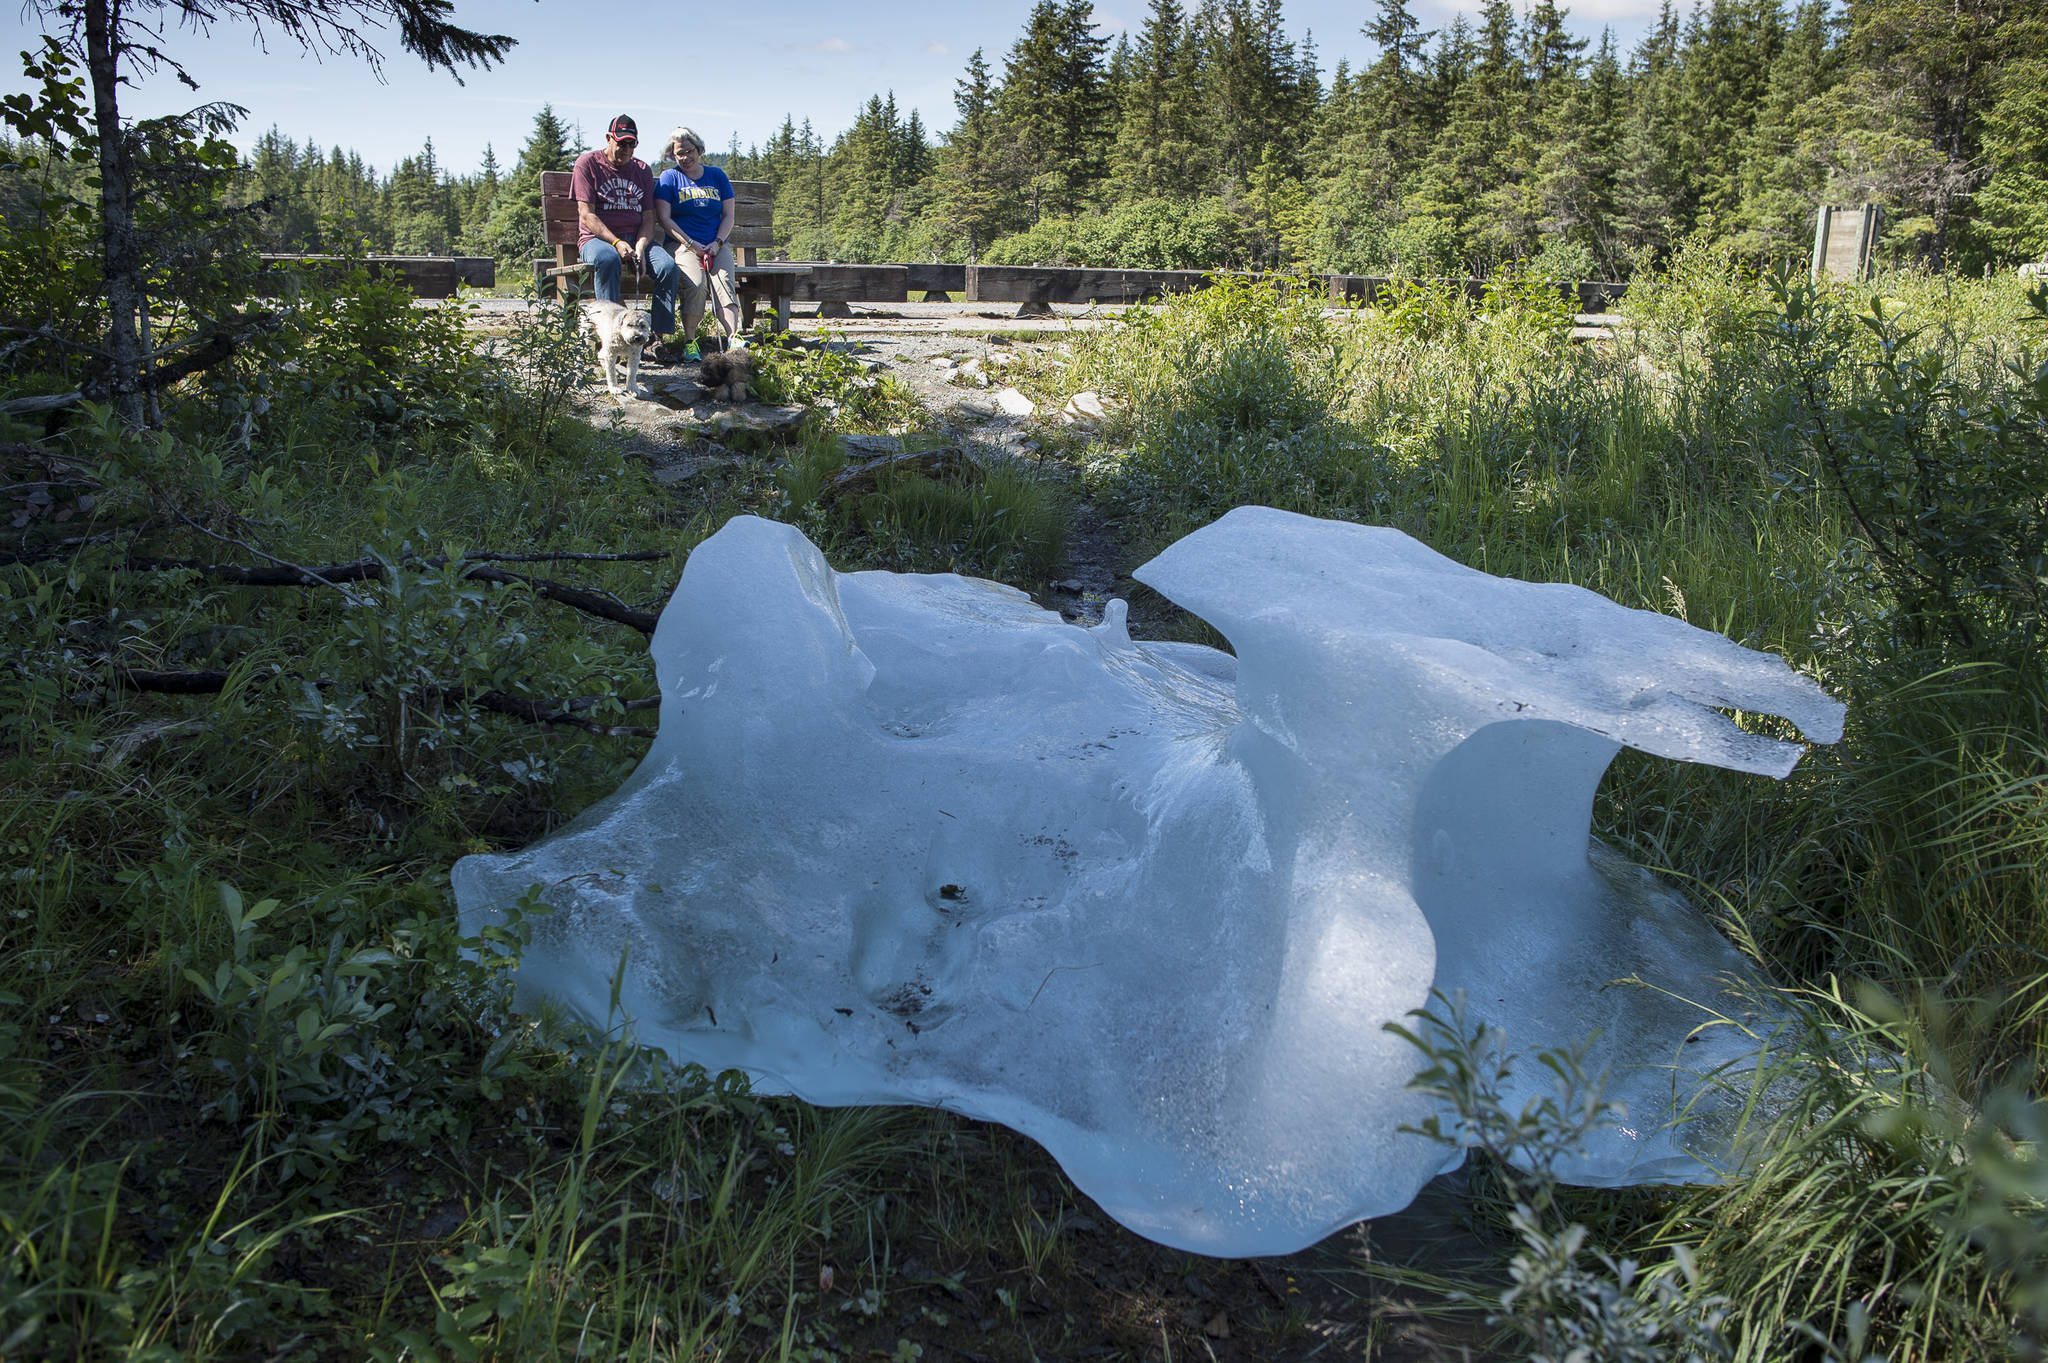 With an iceberg grounded in front of them, Kelly Mercer and her father, Fred Gerle, relax on a bench at the Mendenhall Campground on Friday, July 20, 2018, after Thursday’s flood of Mendenhall Lake. (Michael Penn | Juneau Empire)